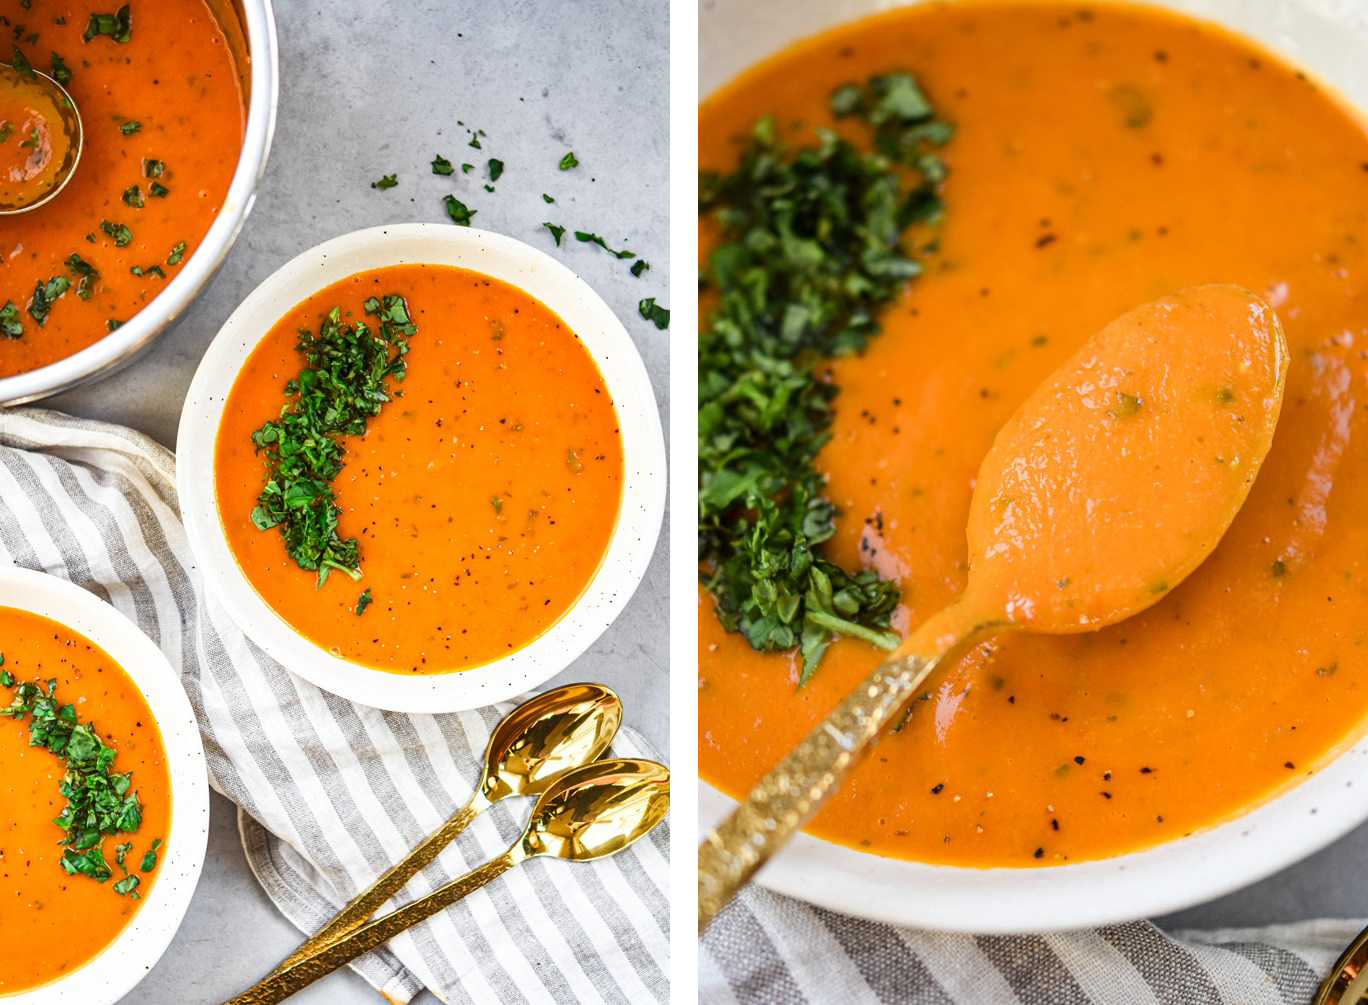 One of the perks of cold weather is getting to make and eat soup! Soup is filling, easy to make, healthy, and makes for great leftovers. Click through to find 100+ delicious family-approved soup recipes to make all fall and winter long. | glitterinc.com | @glitterinc